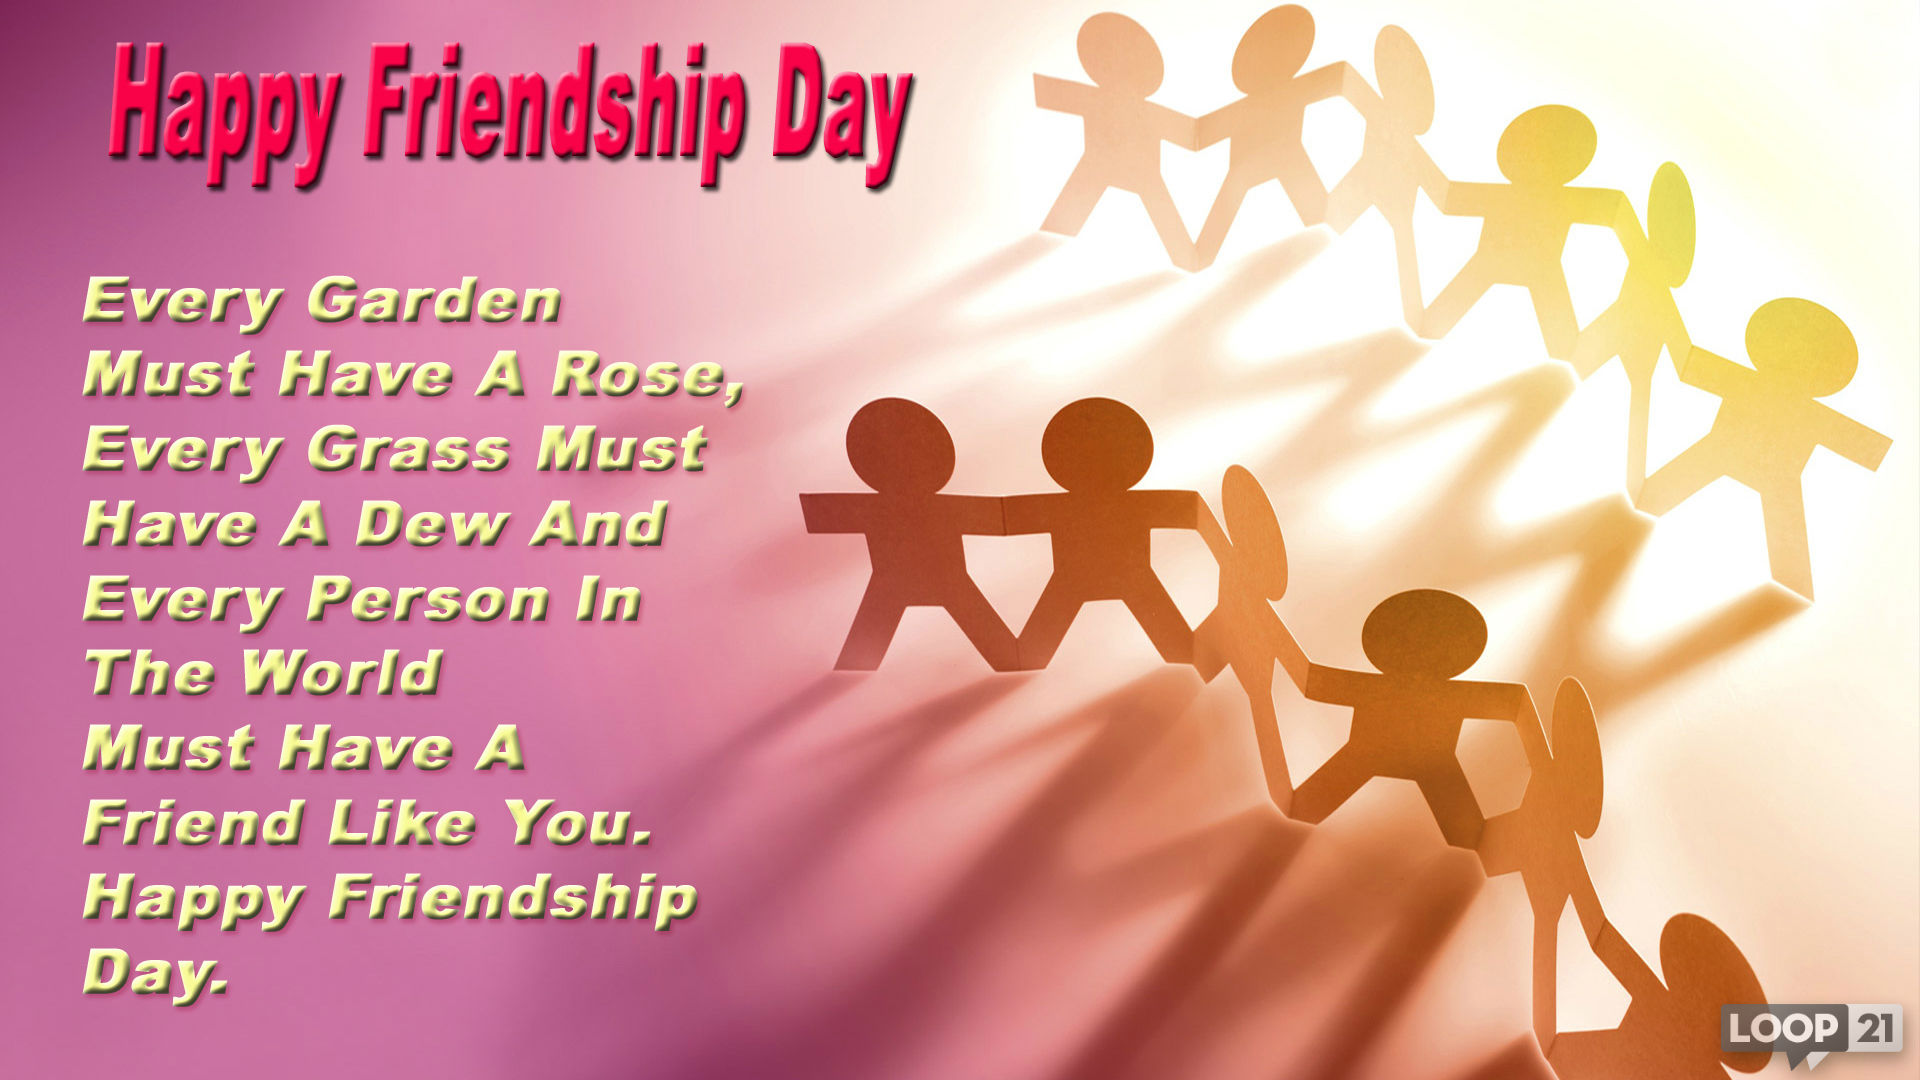 Friendship Day Quote - Friendship Day Images With Quotes - HD Wallpaper 